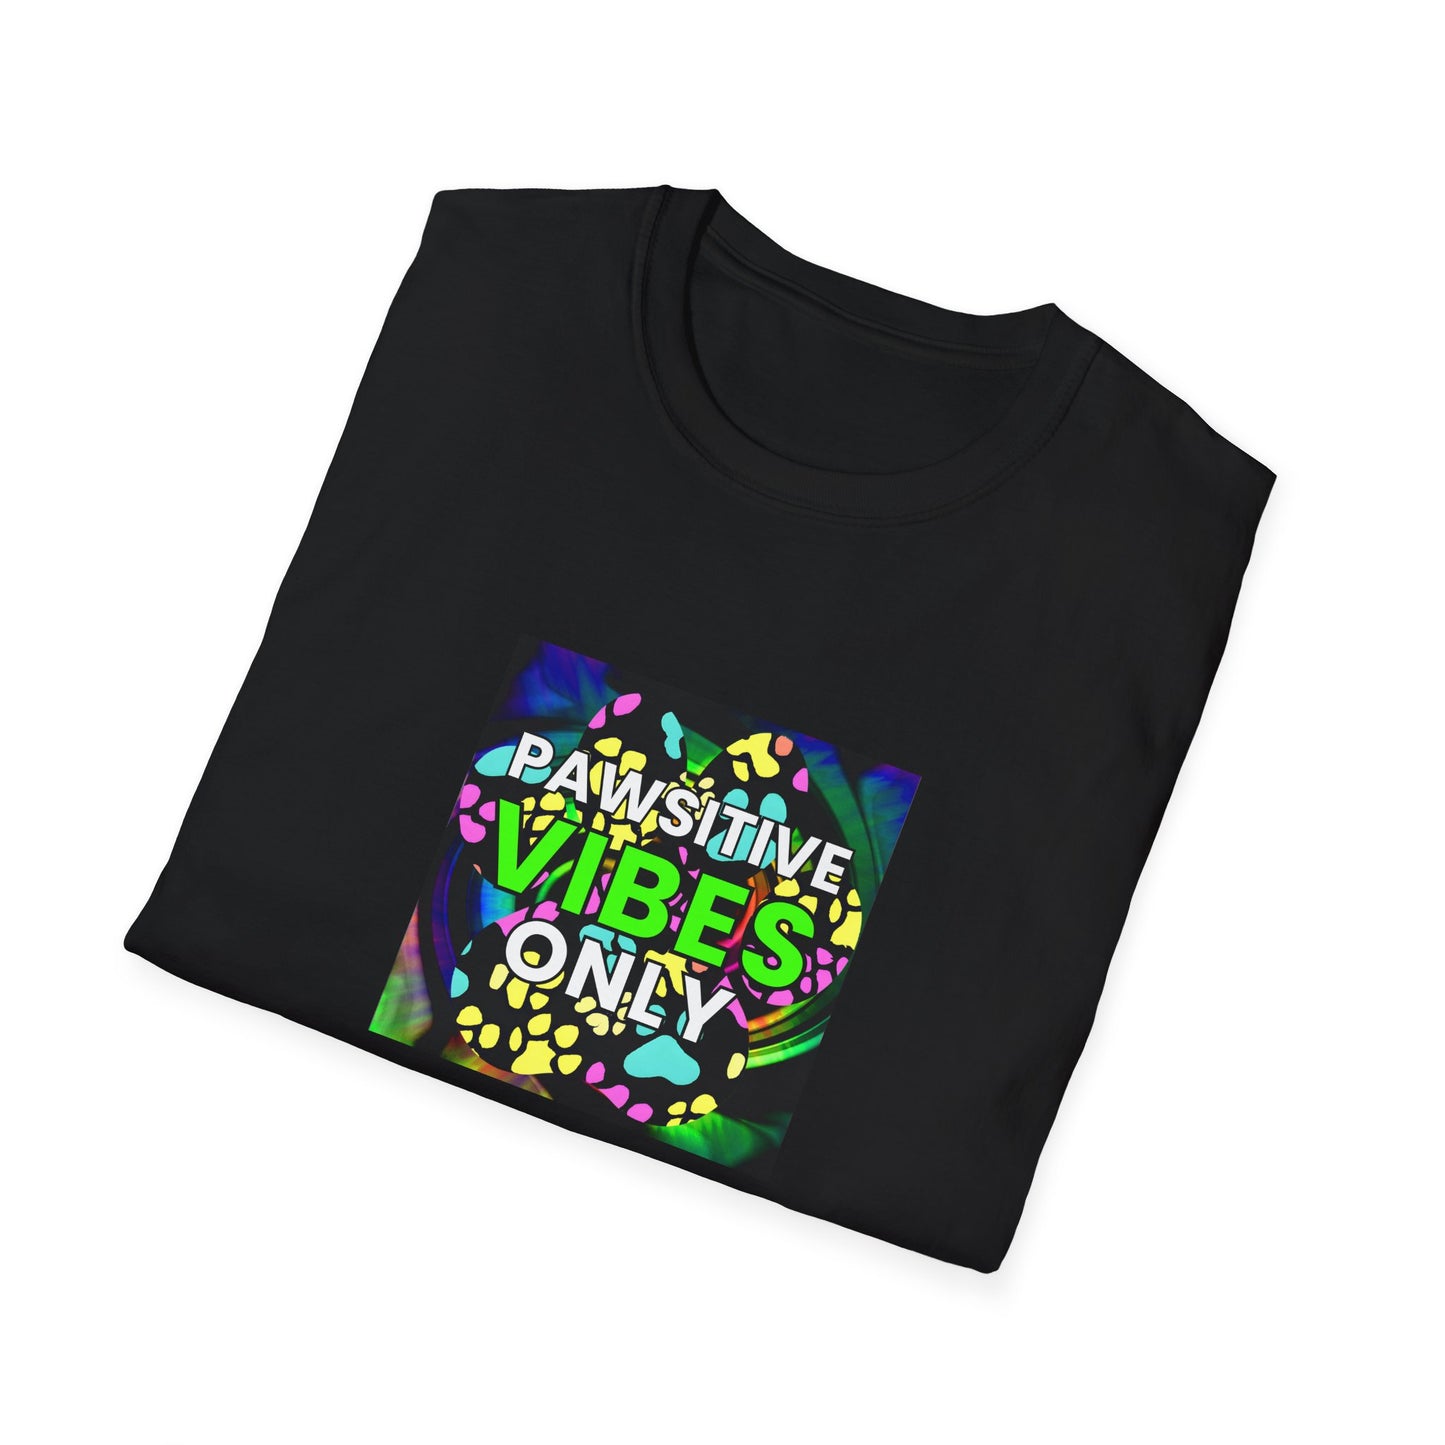 The Optimist Mastermind - Wiley Witt - "Pawsitive Vibes Only" Unisex Tee